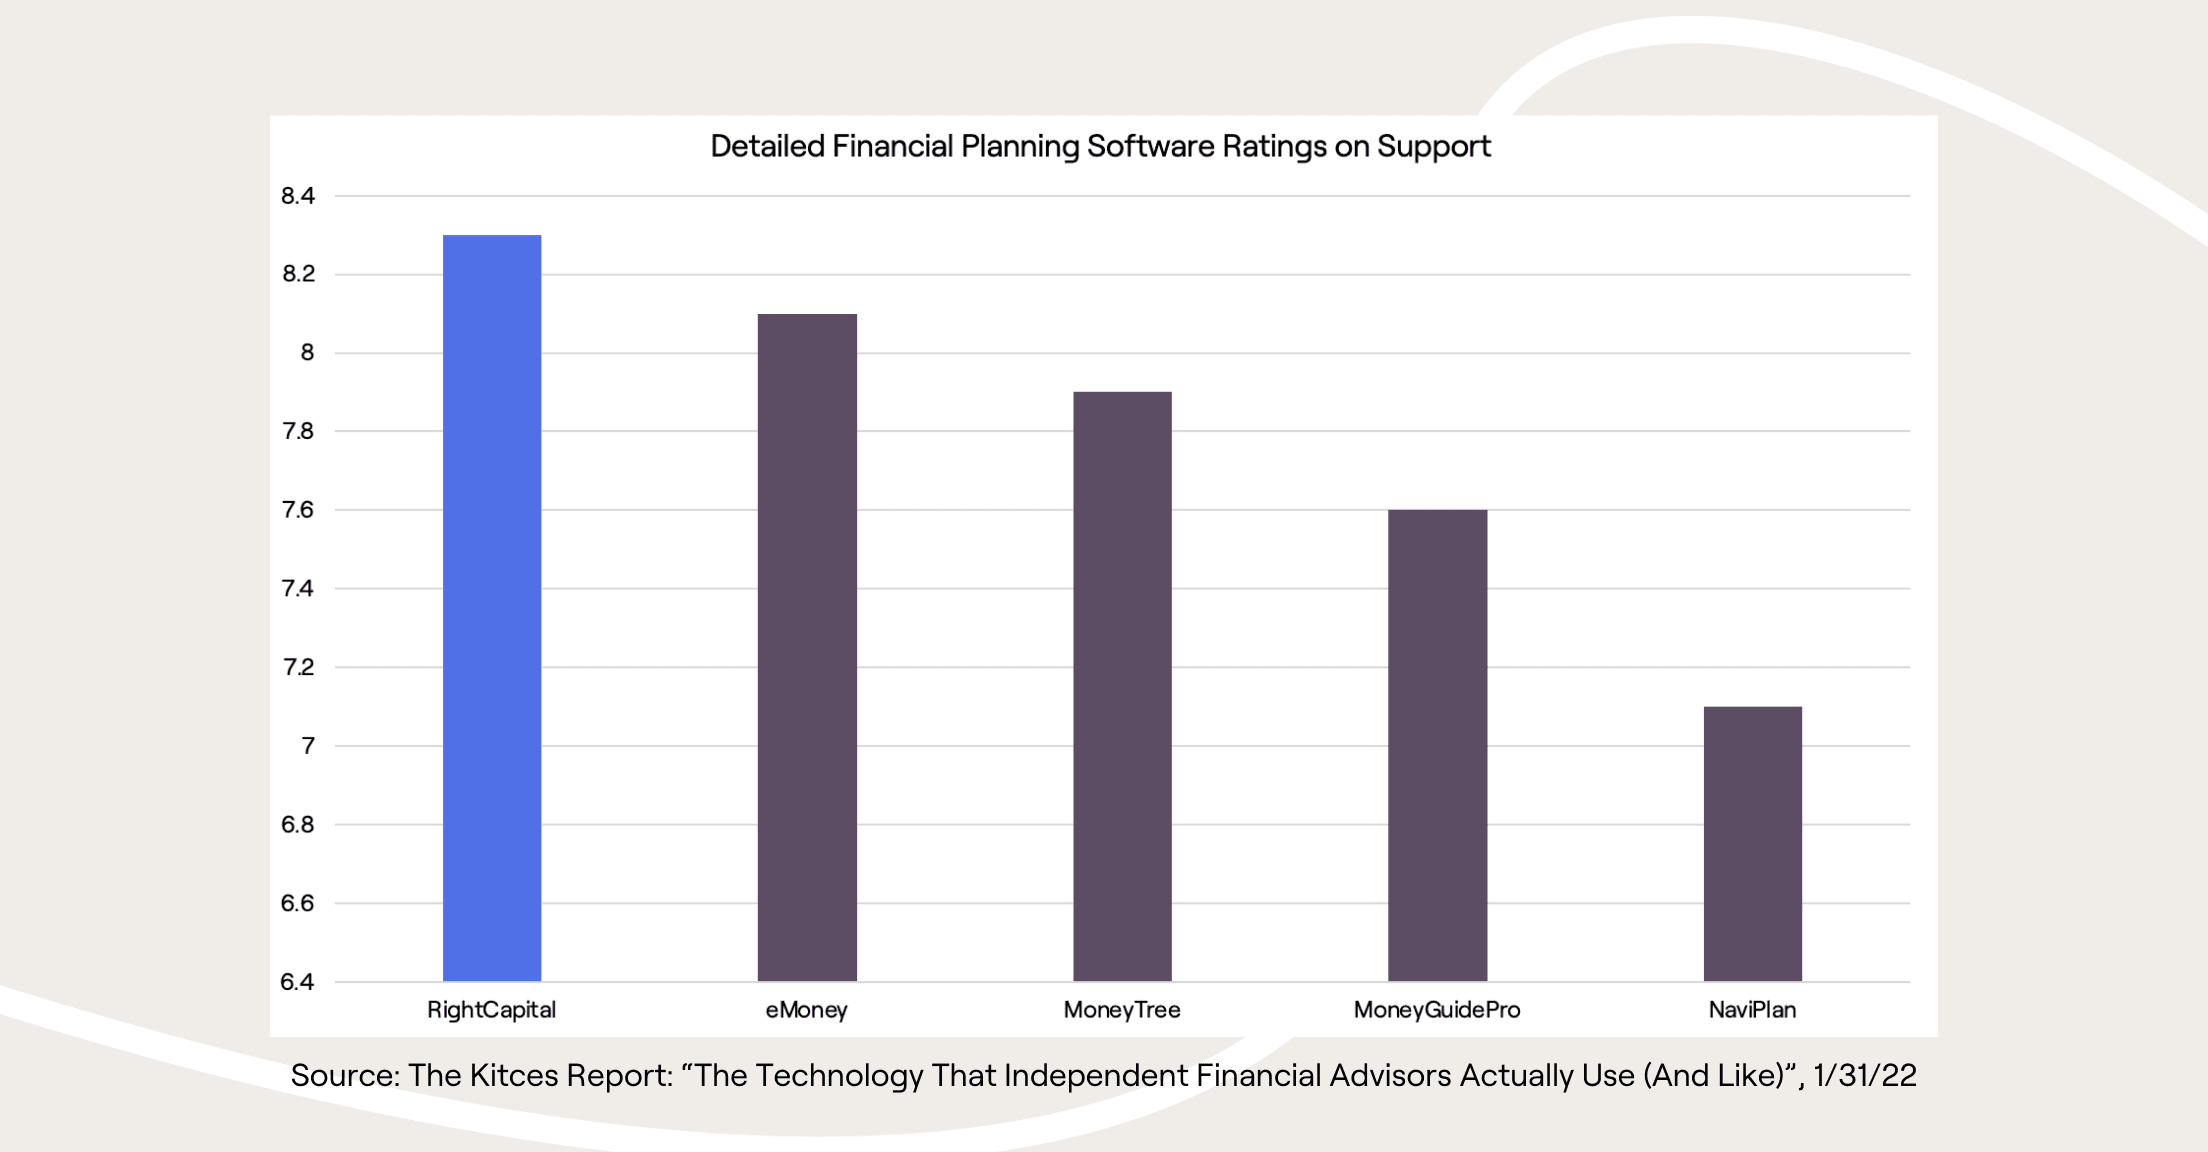 Financial planning software support ratings per the 2022 Kitces Report, showing RightCapital in the lead